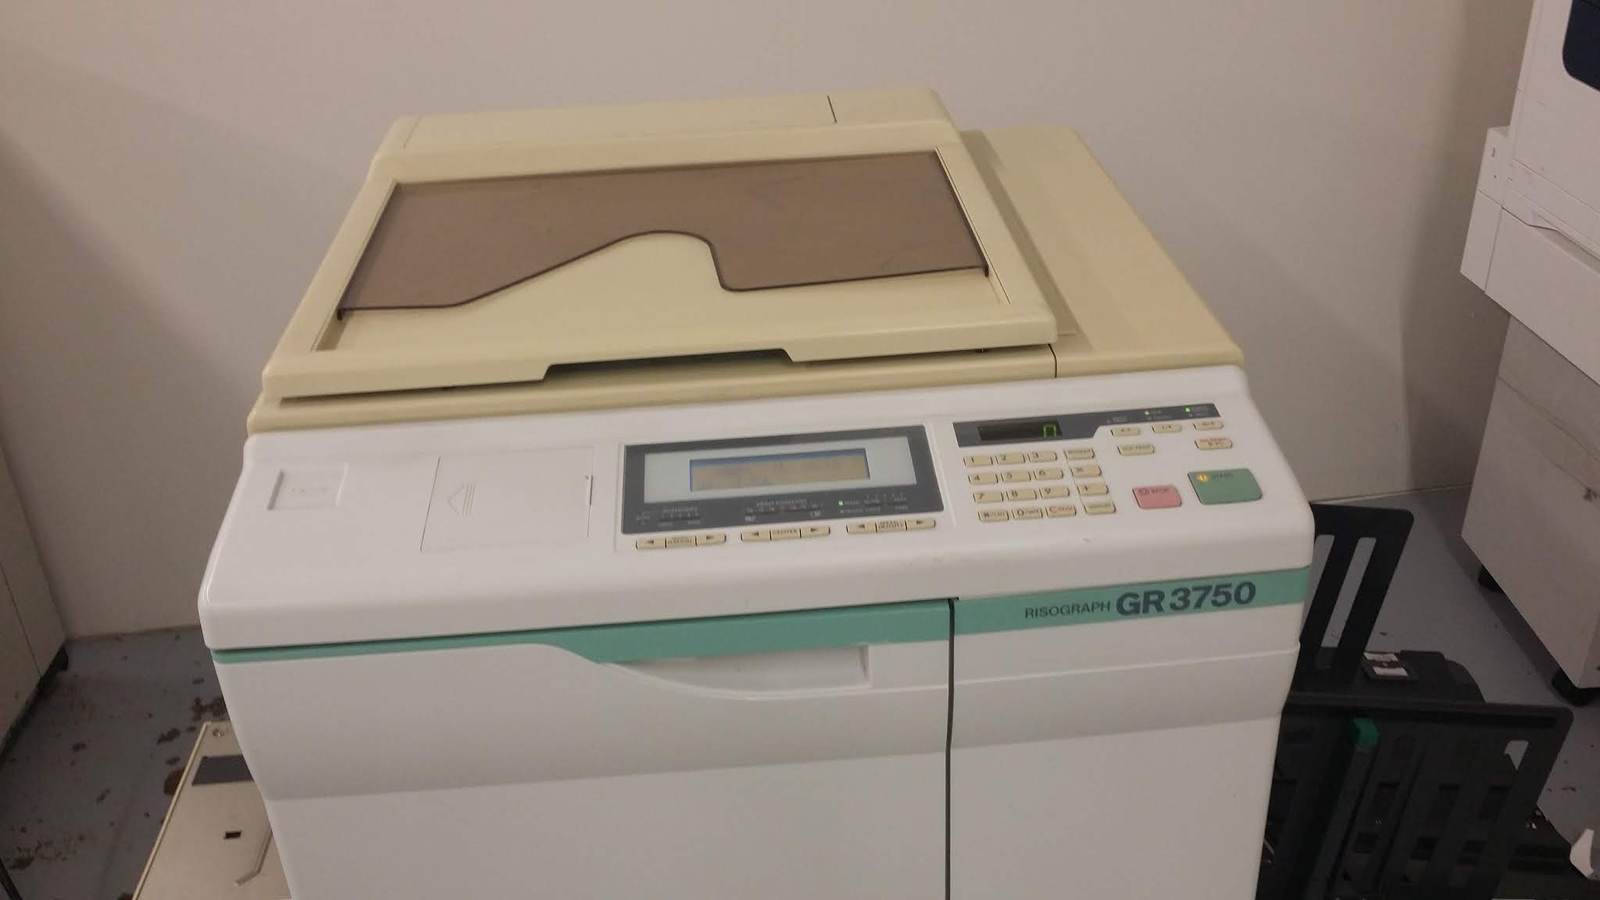 Risograph GR3750 Duplicator - Other